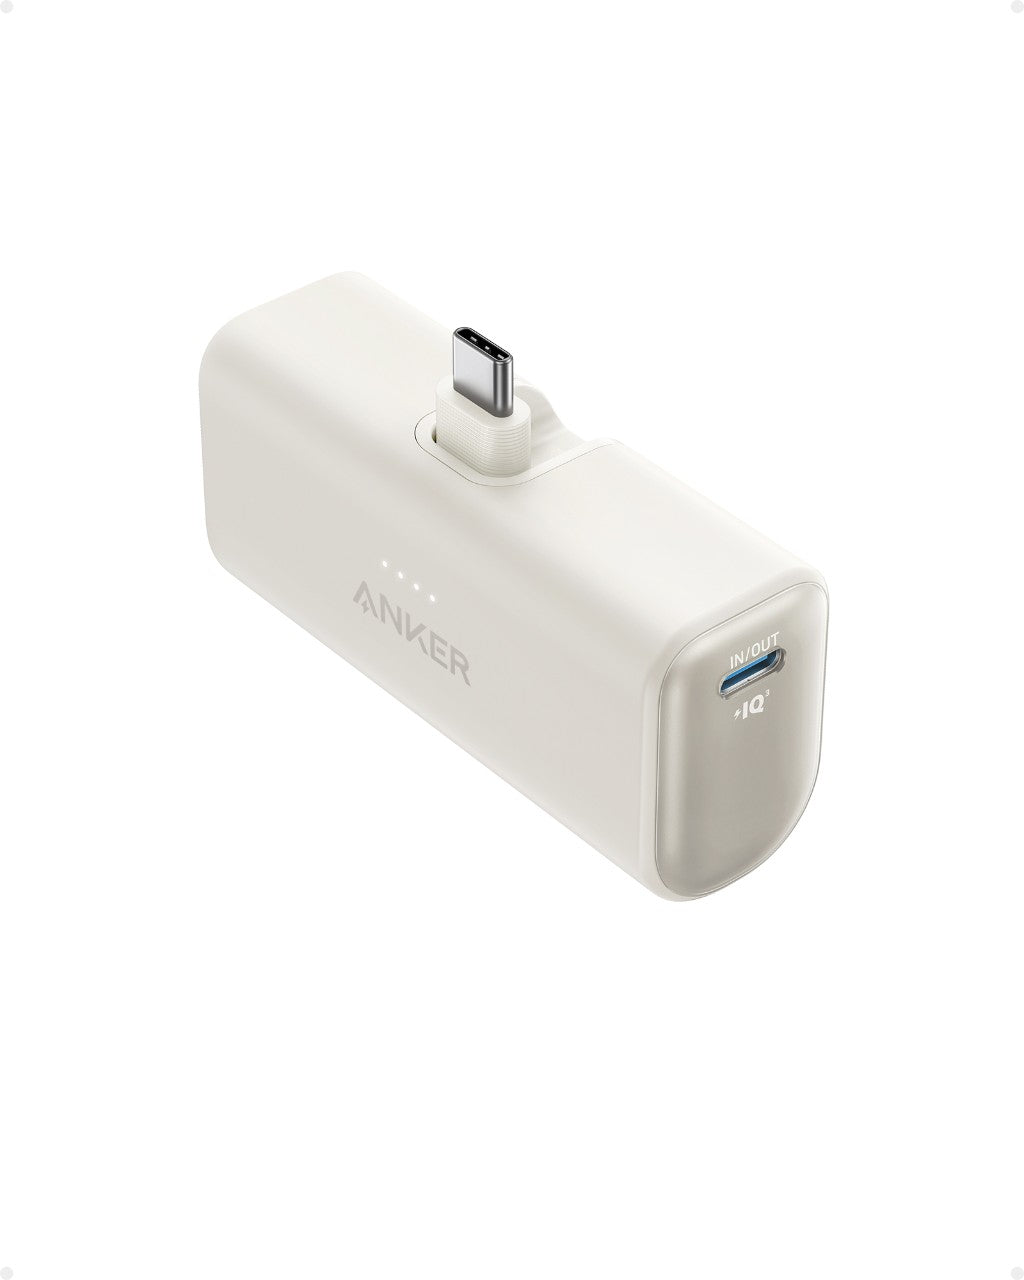 Anker Nano Power Bank (22.5W, Built-In USB-C Connector)